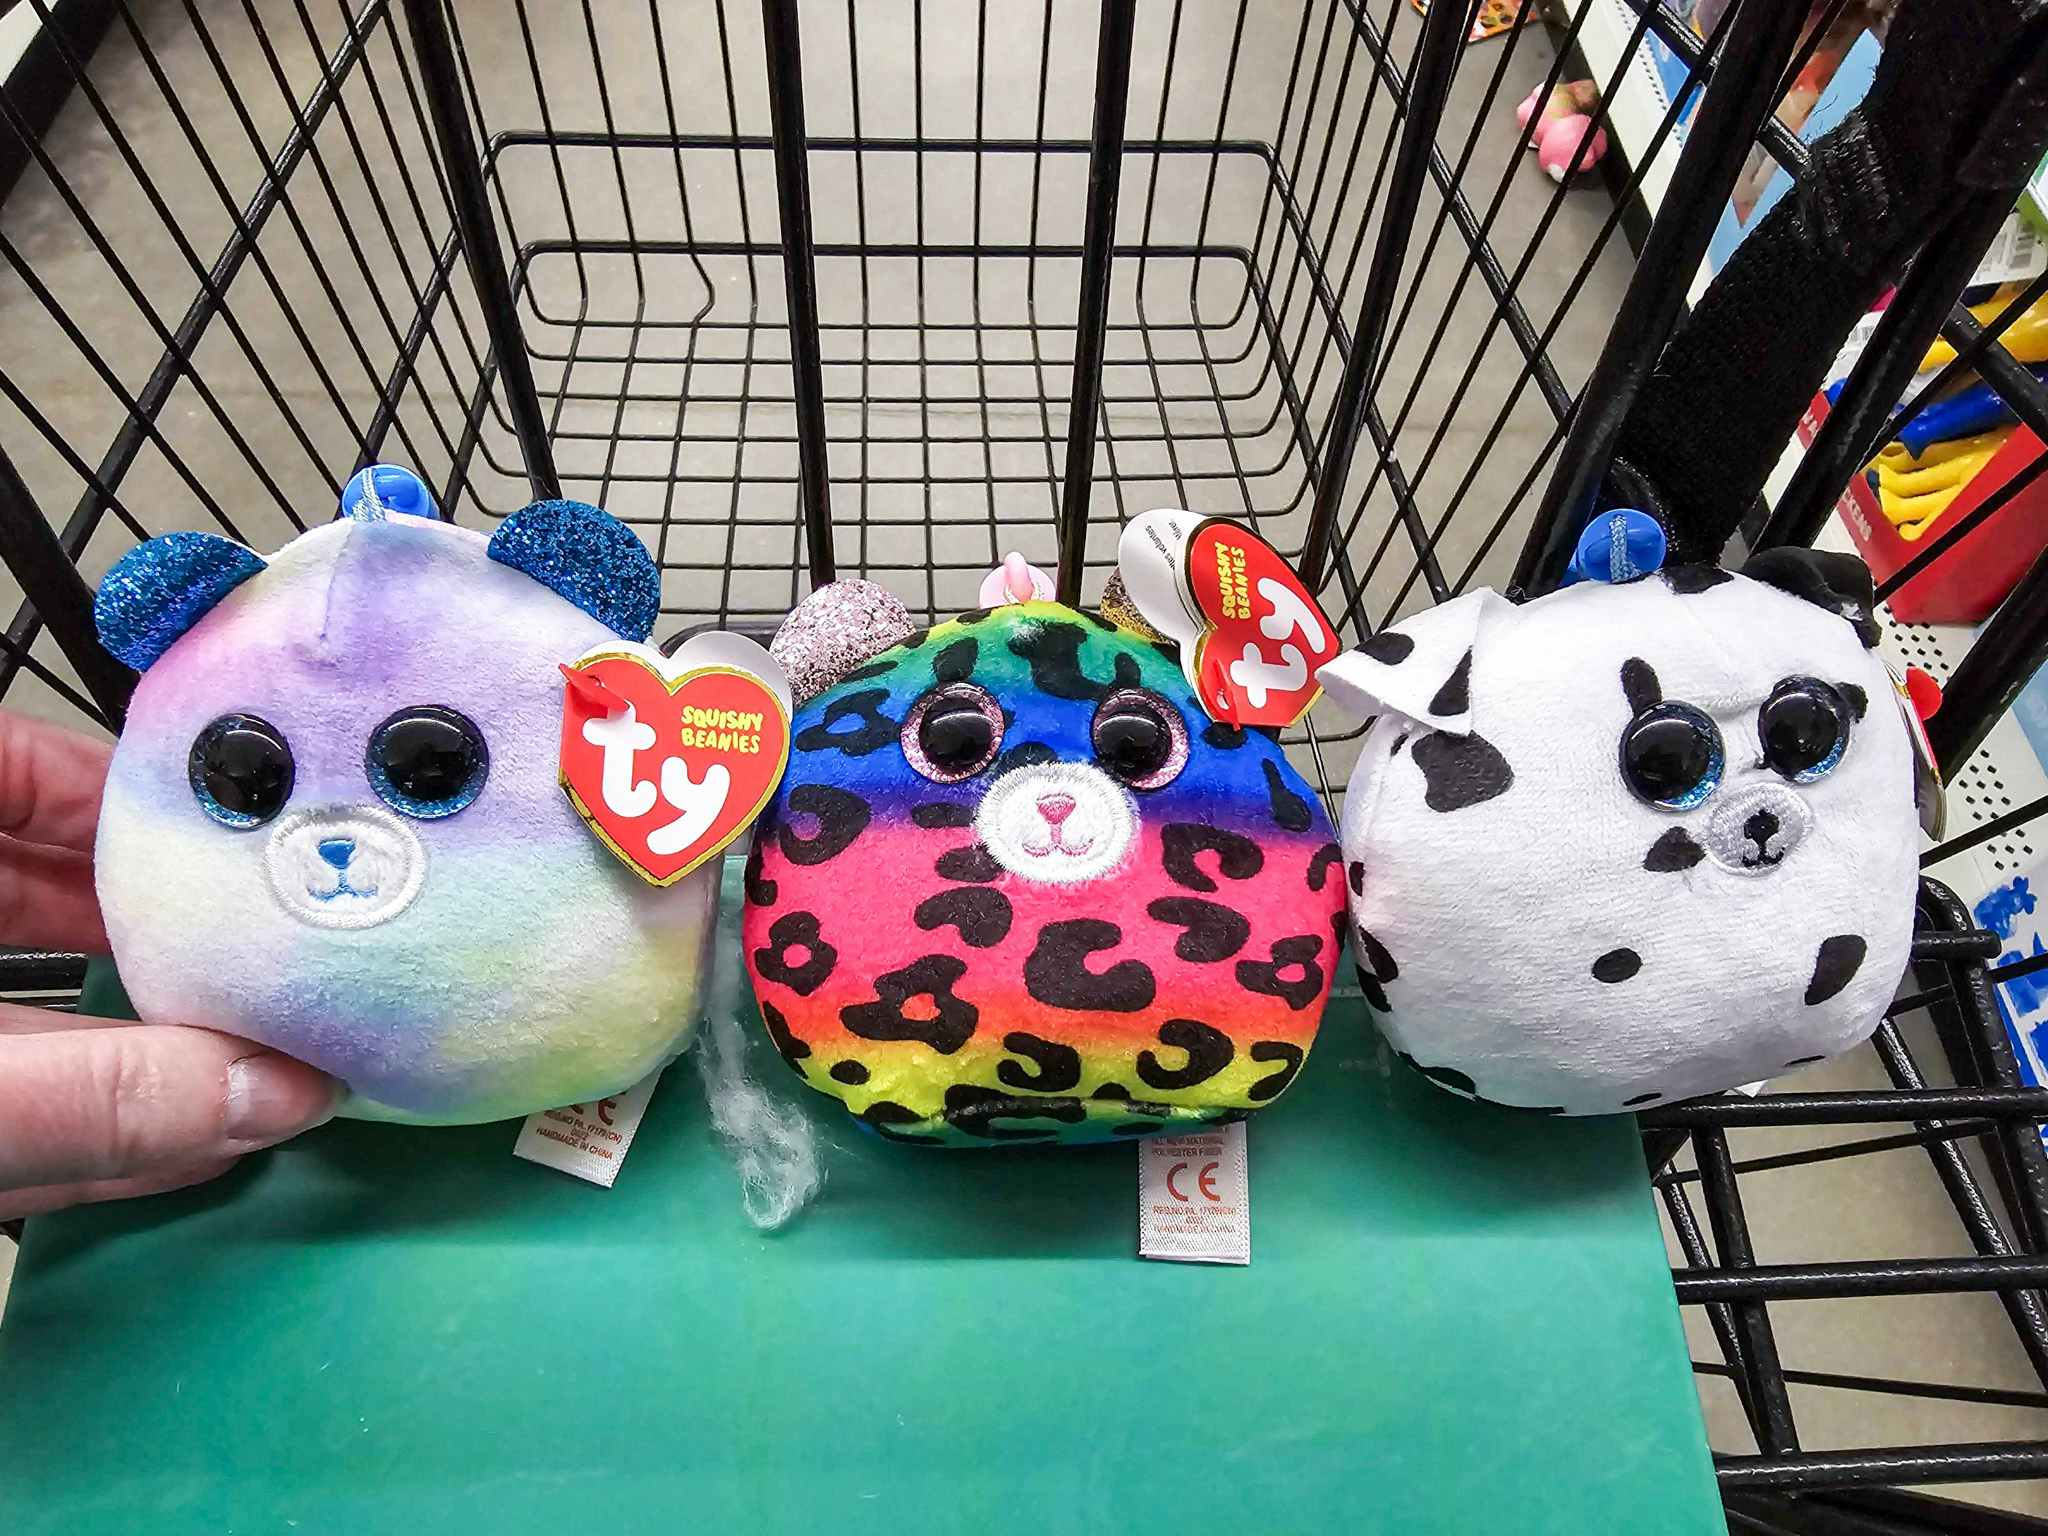 3 ty squishy beanies in a cart